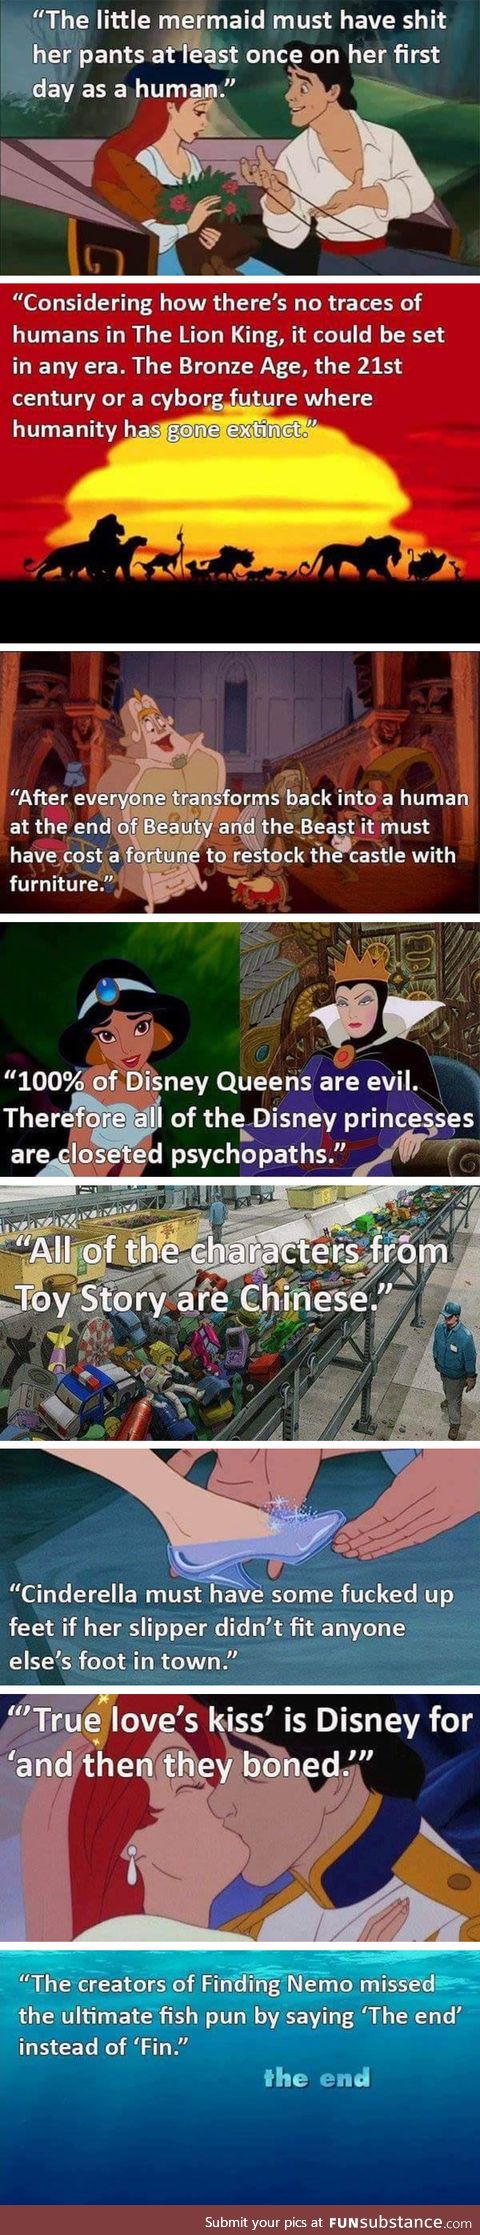 Something to think about: Disney edition